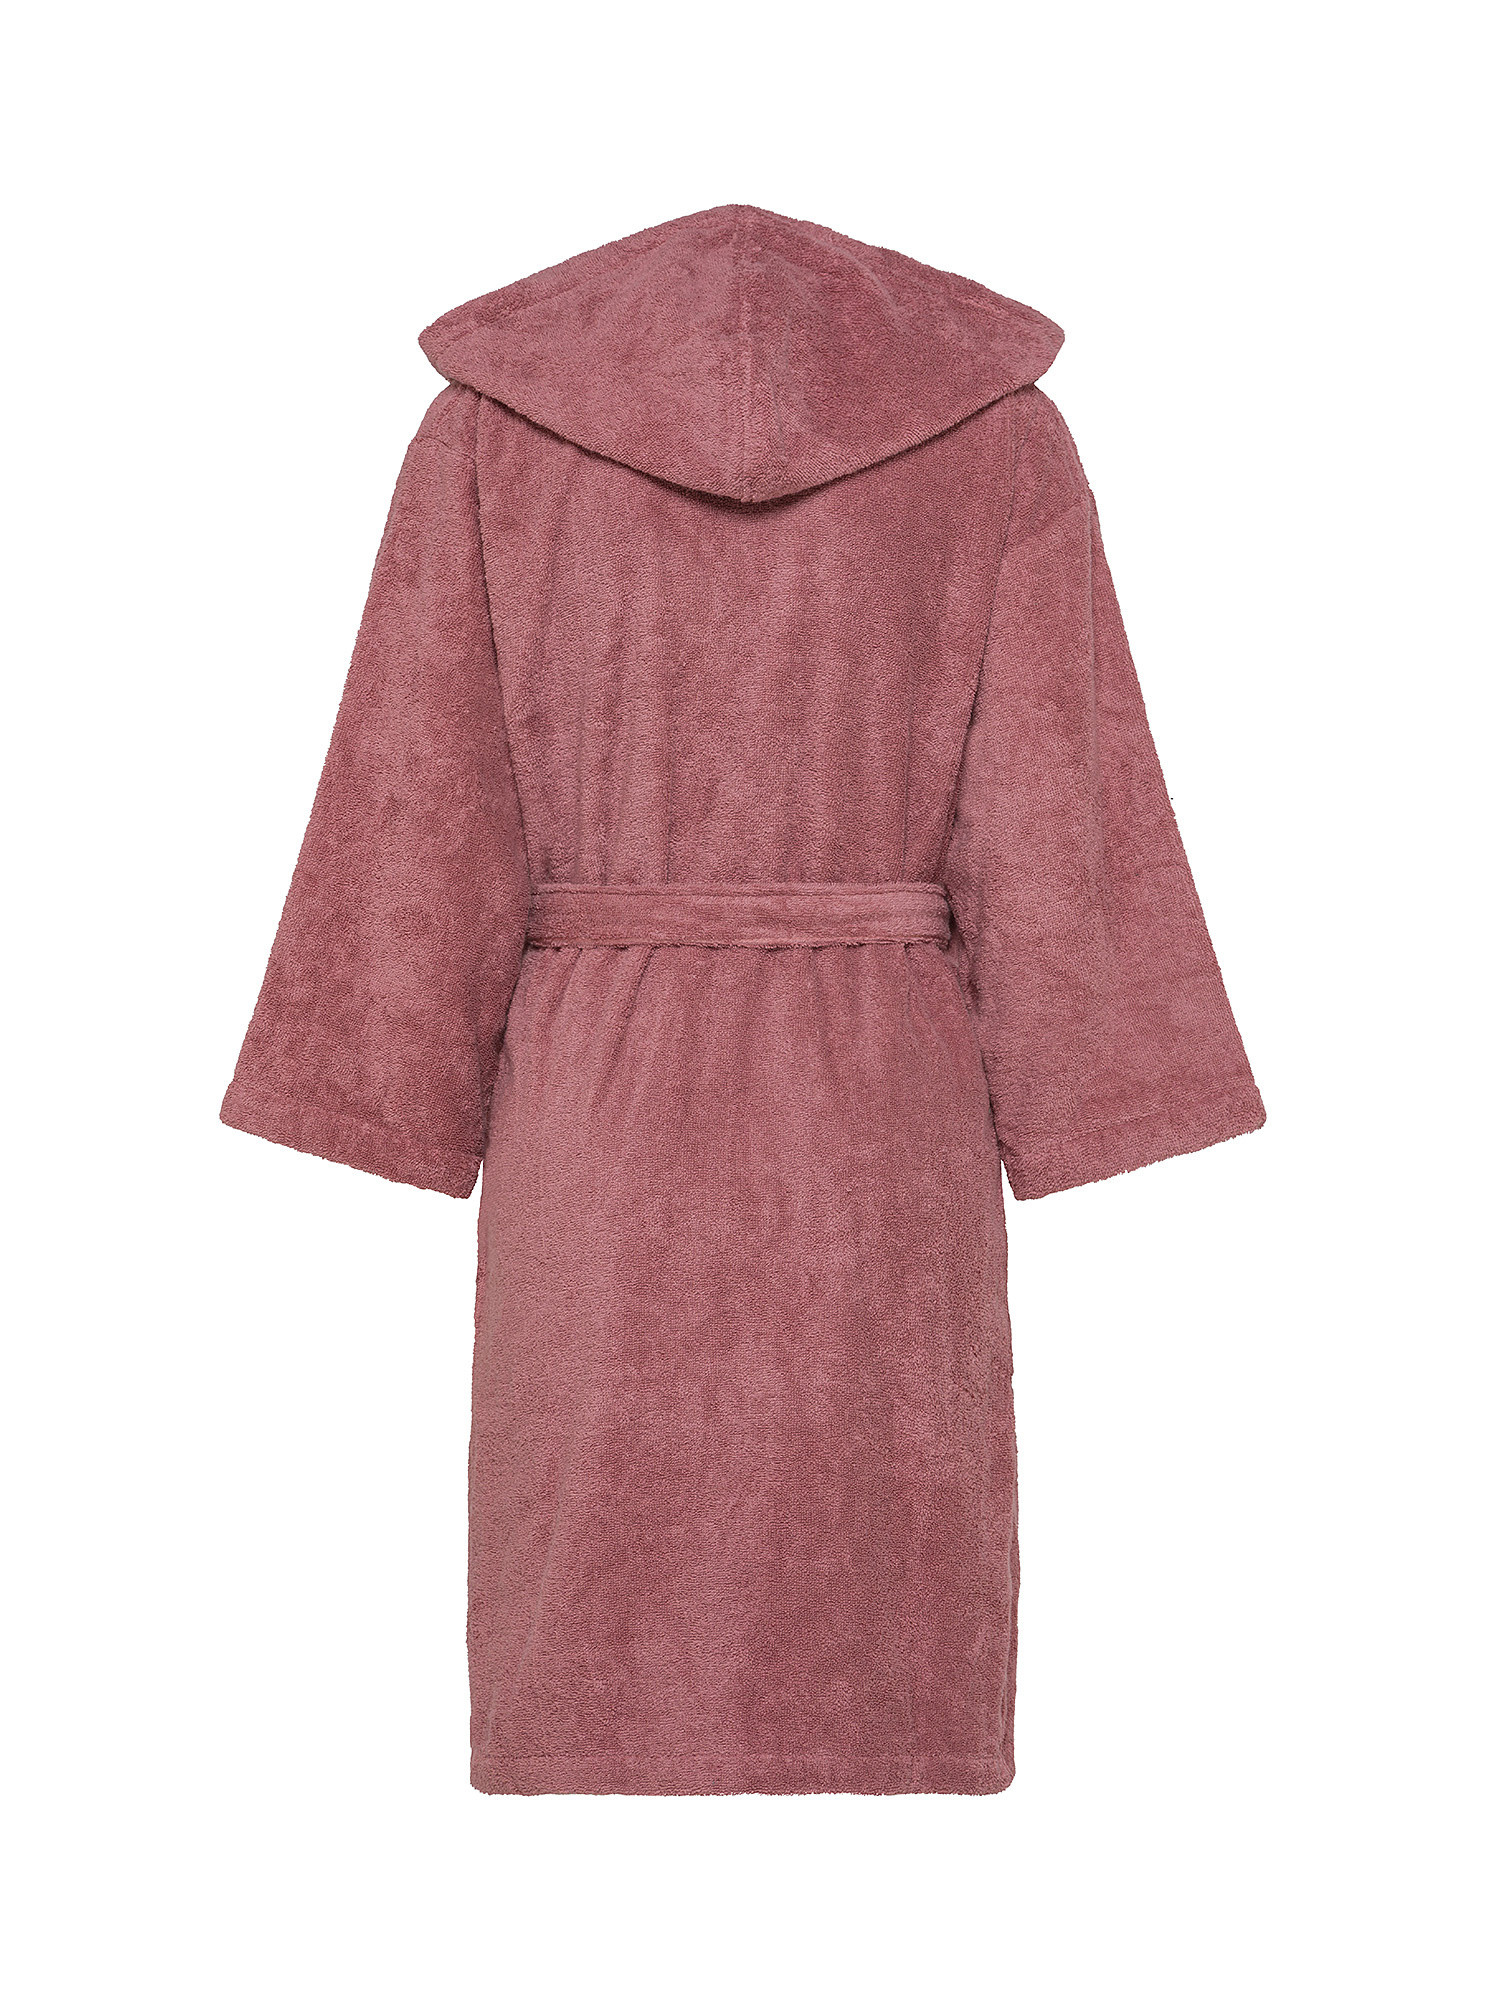 Zefiro solid color 100% cotton bathrobe, Pink, large image number 1